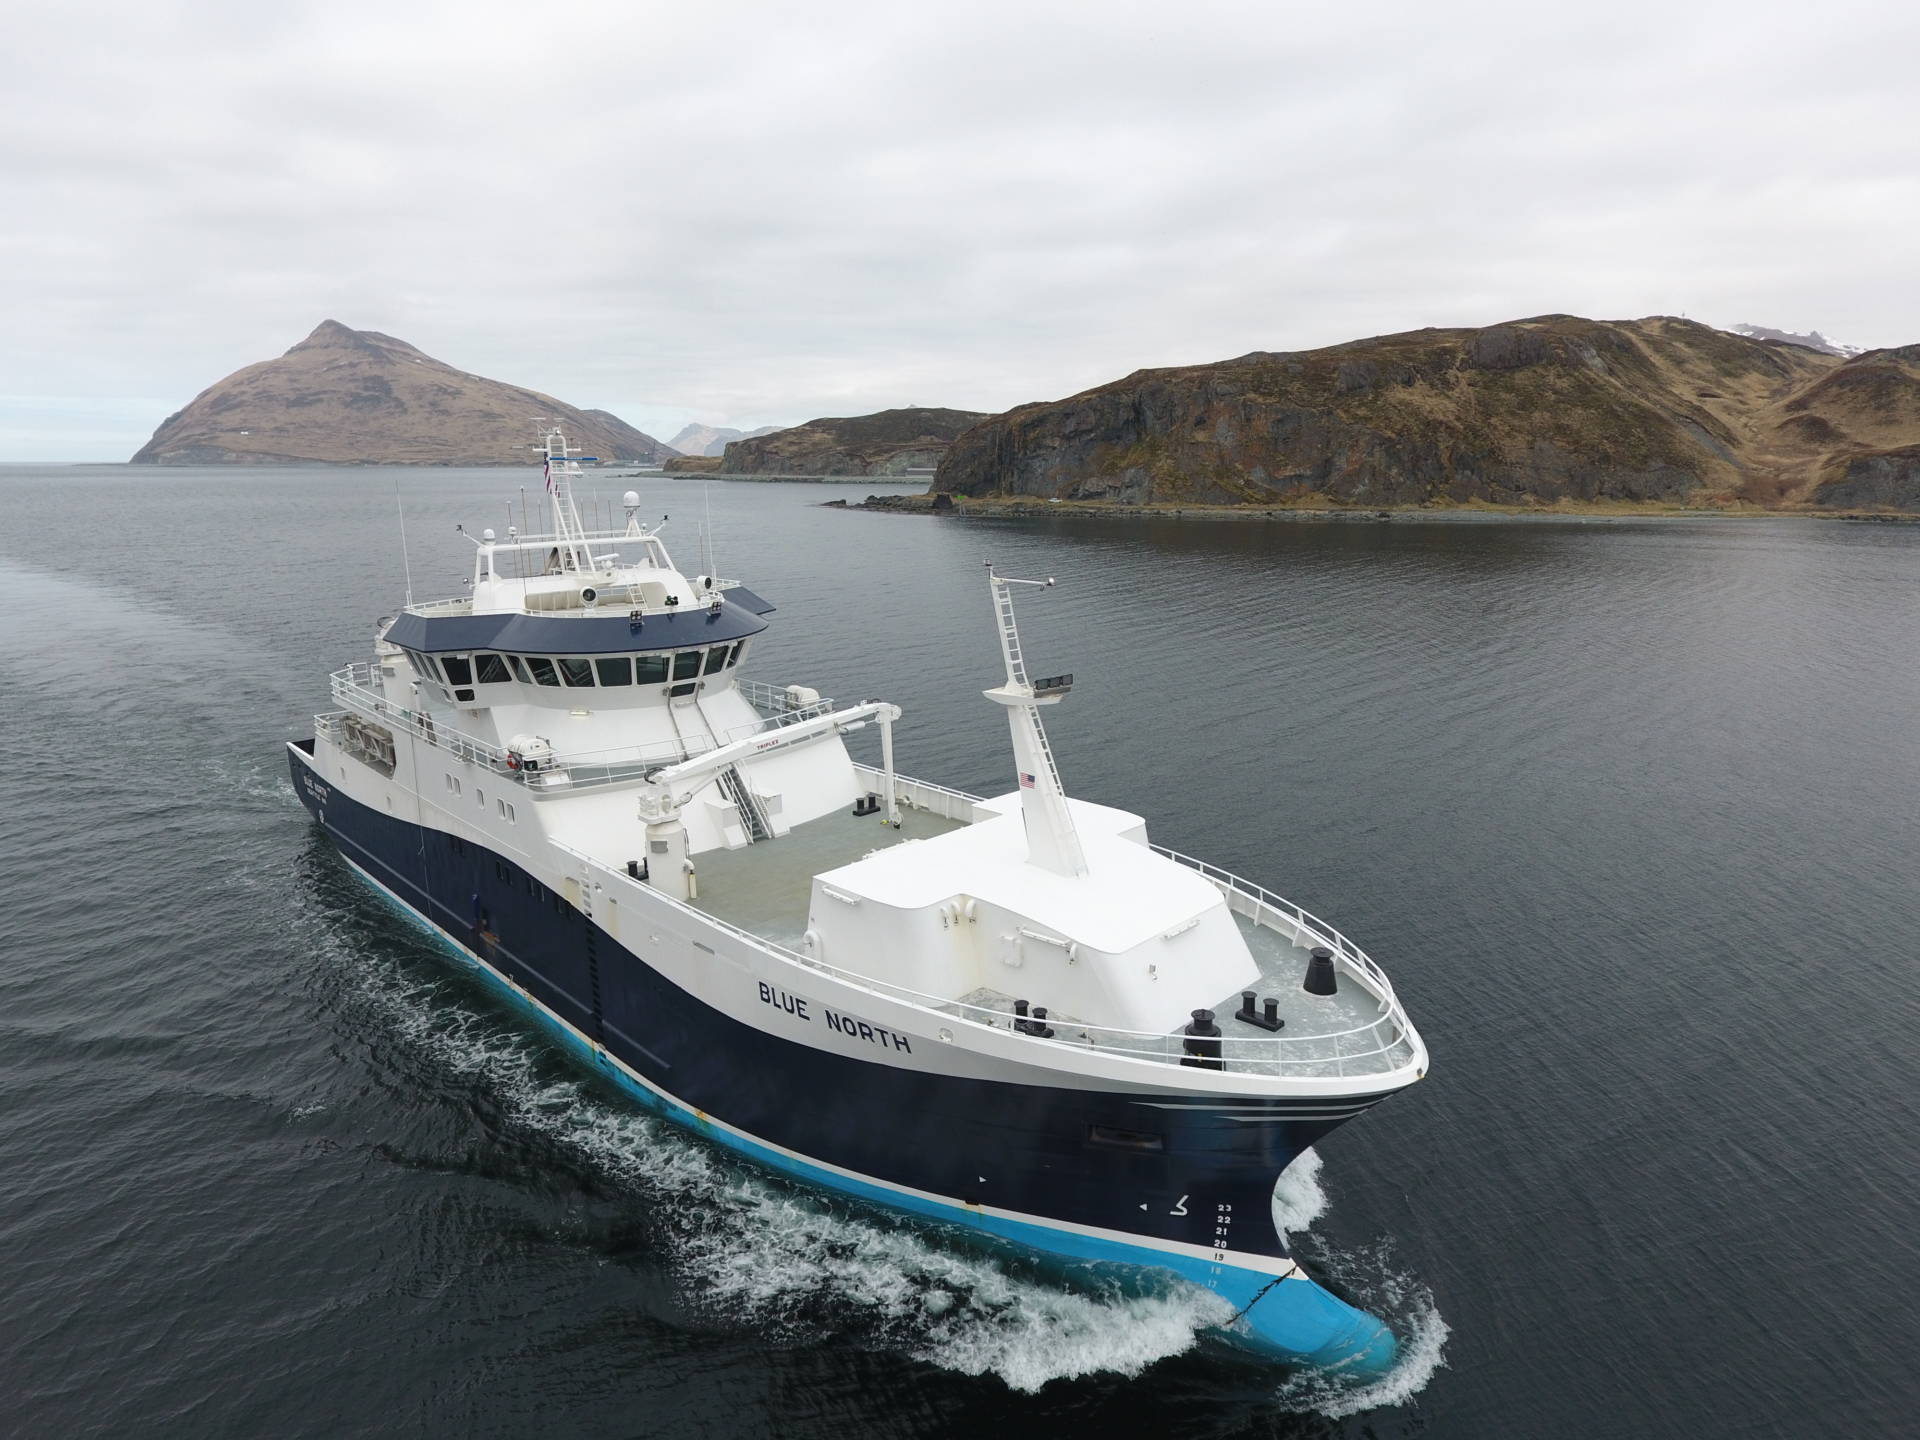 Blue North is a new fishing vessel designed to catch Pacific cod using a Seafood Watch granted catch method. It also utilizes a stun table to render fish unconscious before processing.